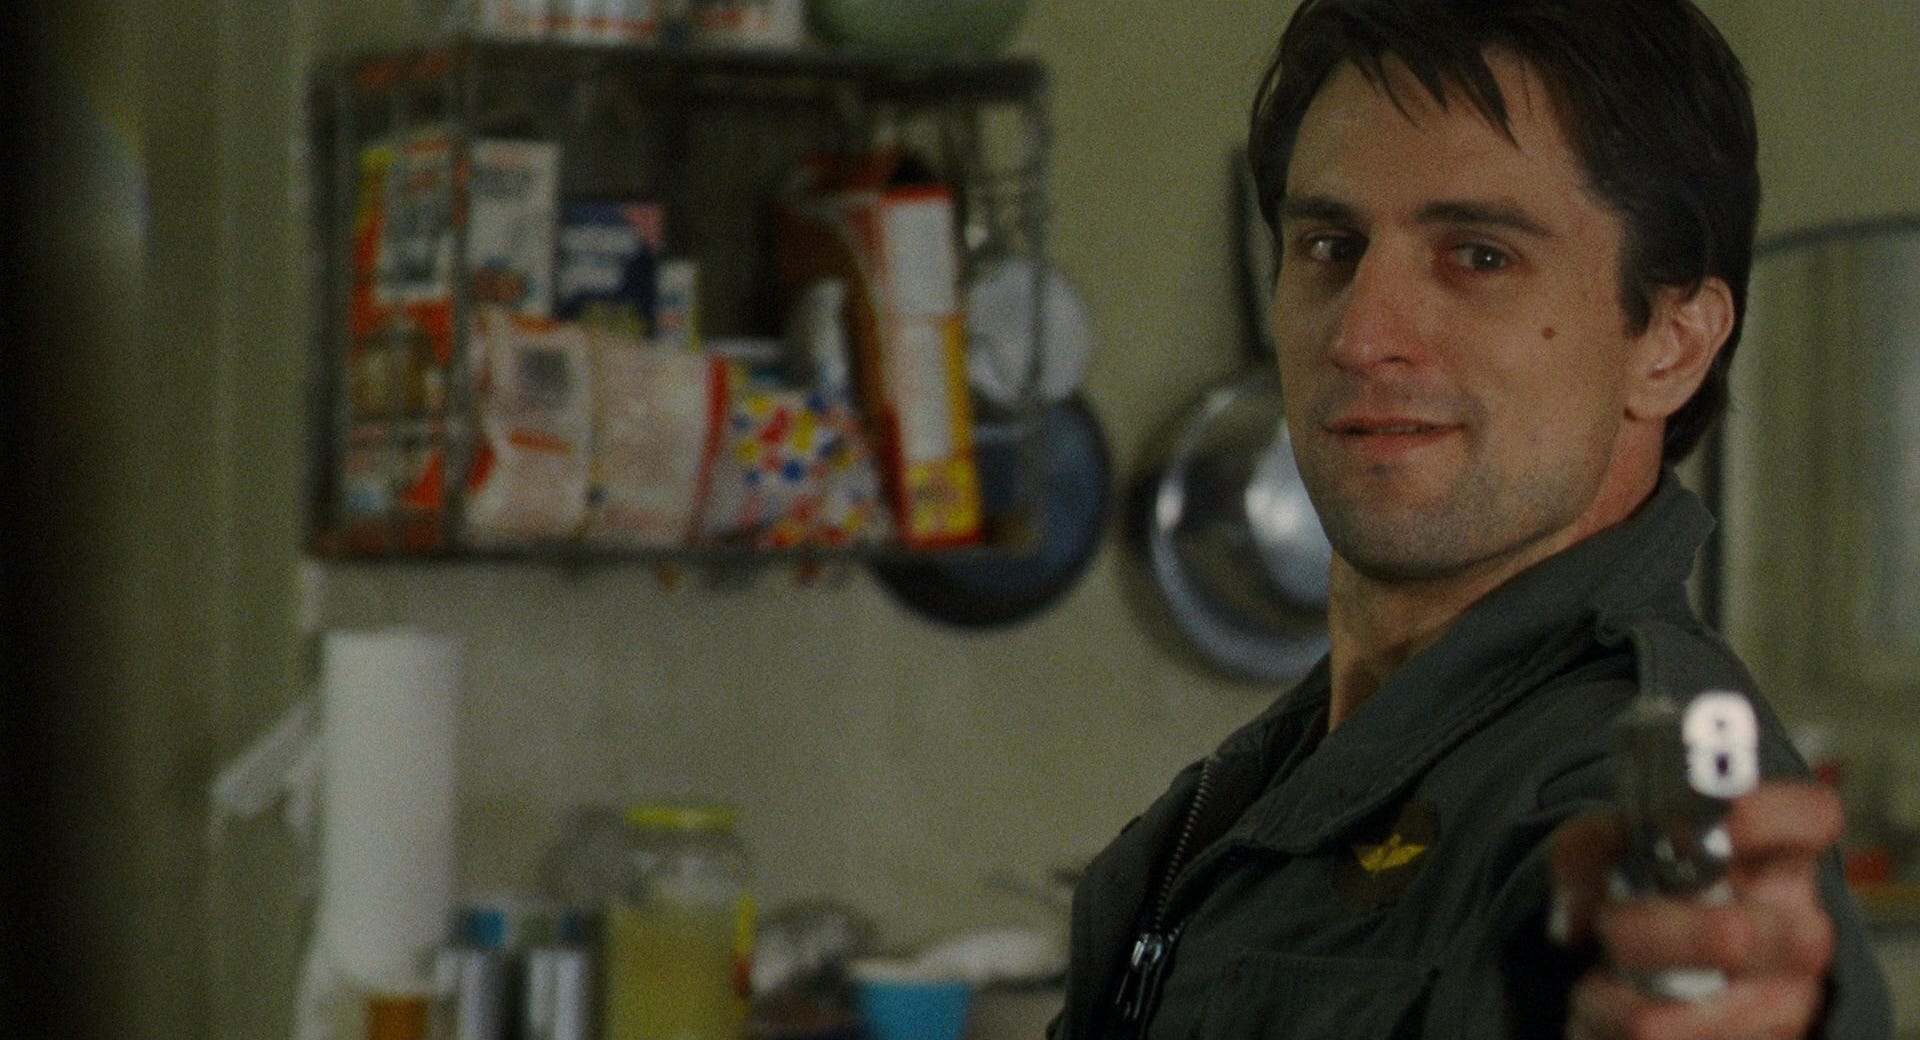 №2: Taxi Driver (1976) - The Pictures - Medium